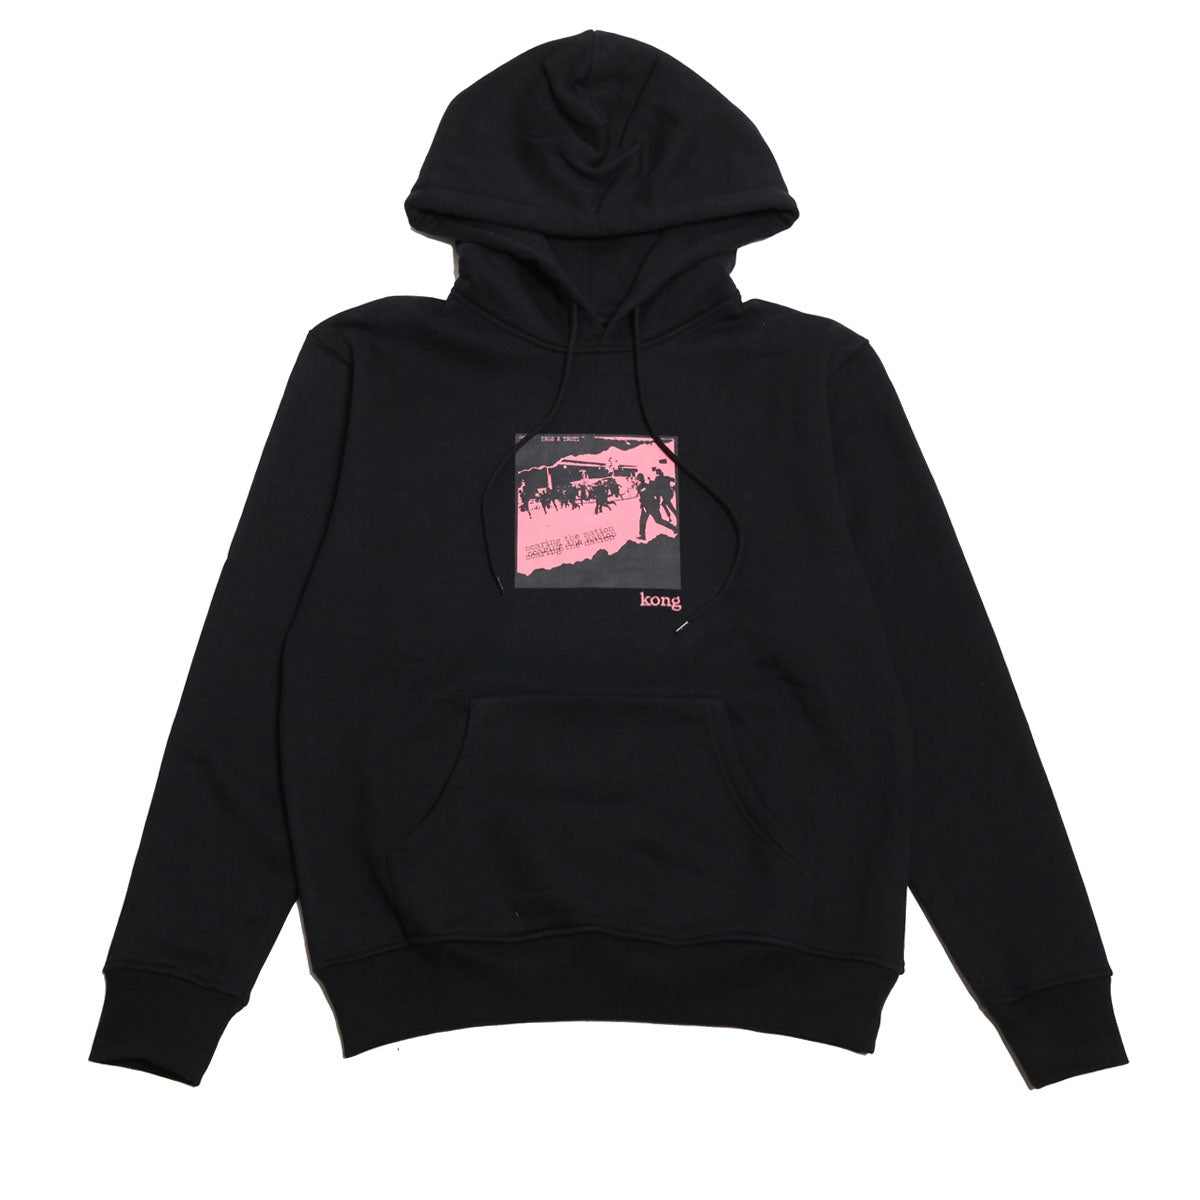 Kong Scaring The Nation Hoodie Black